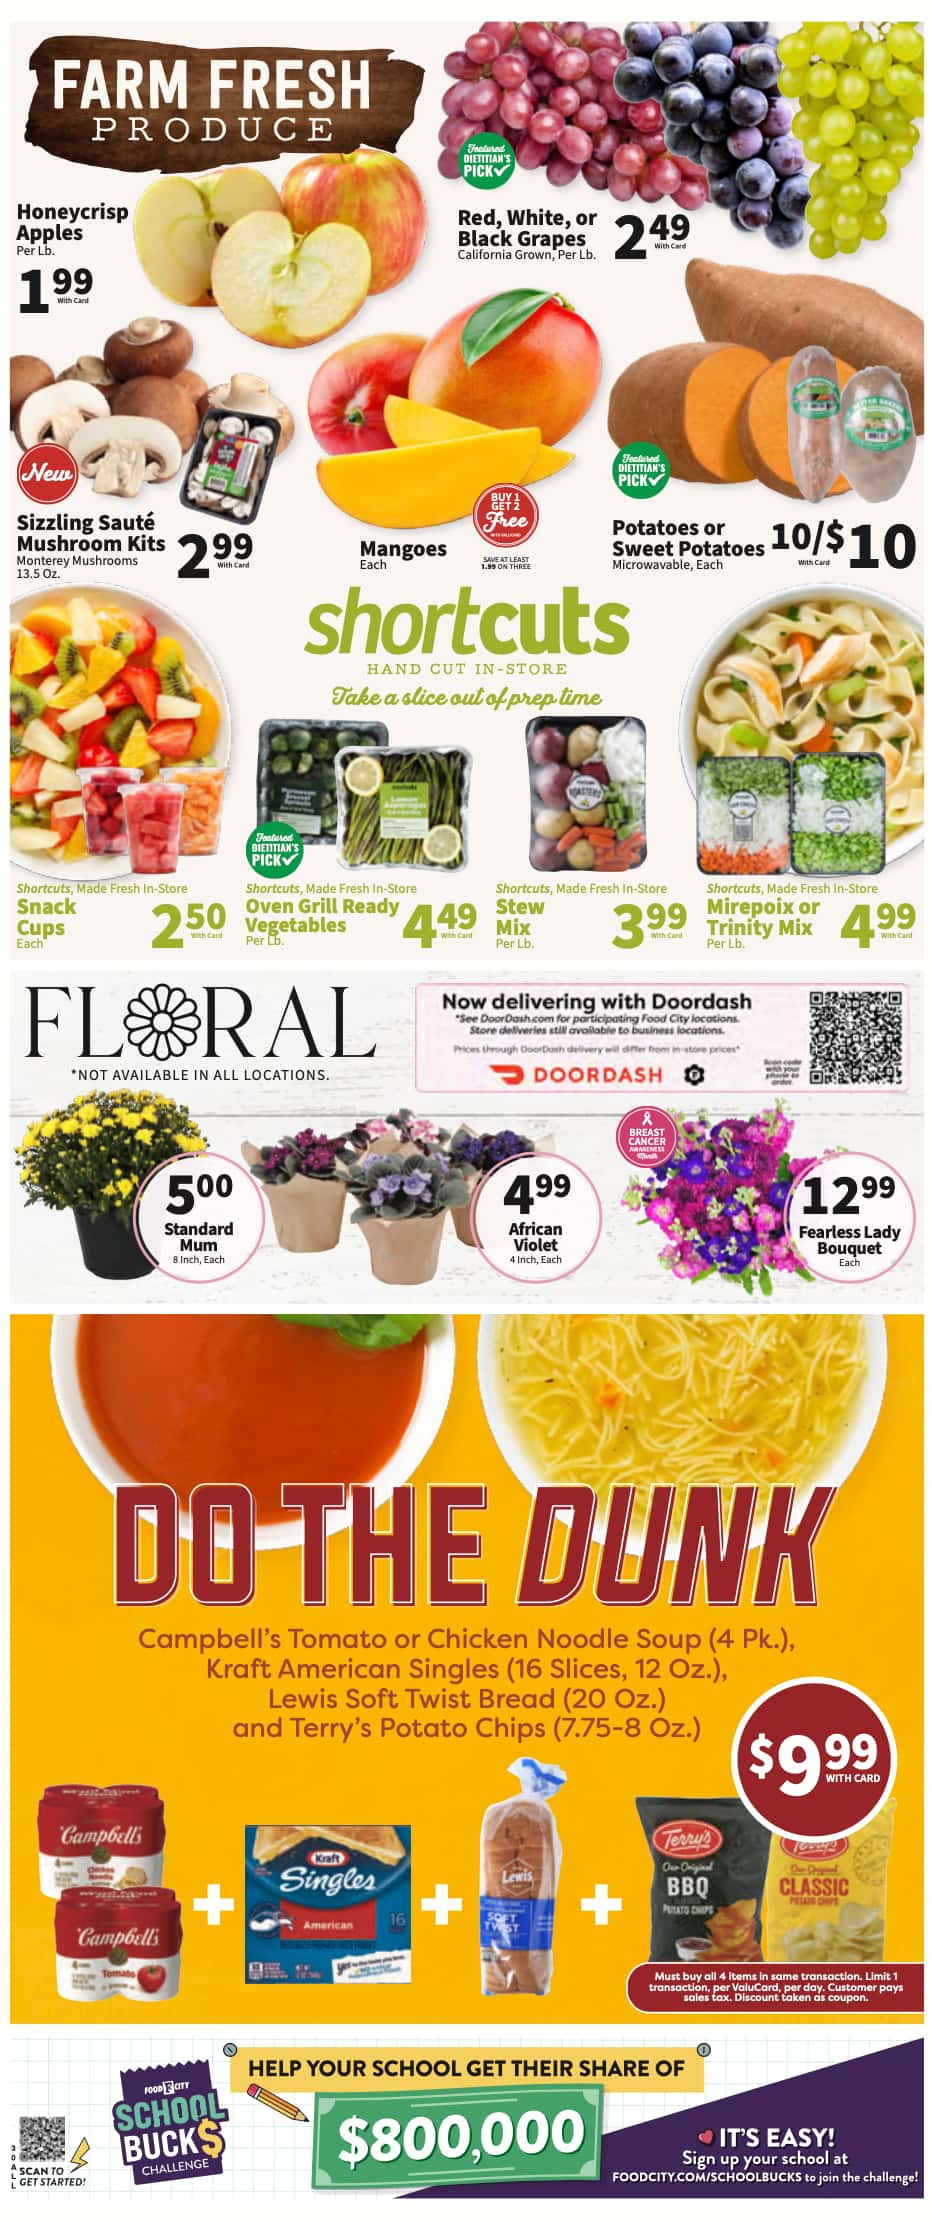 Food City Weekly Ad Preview: (October 4 - October 10 2023)